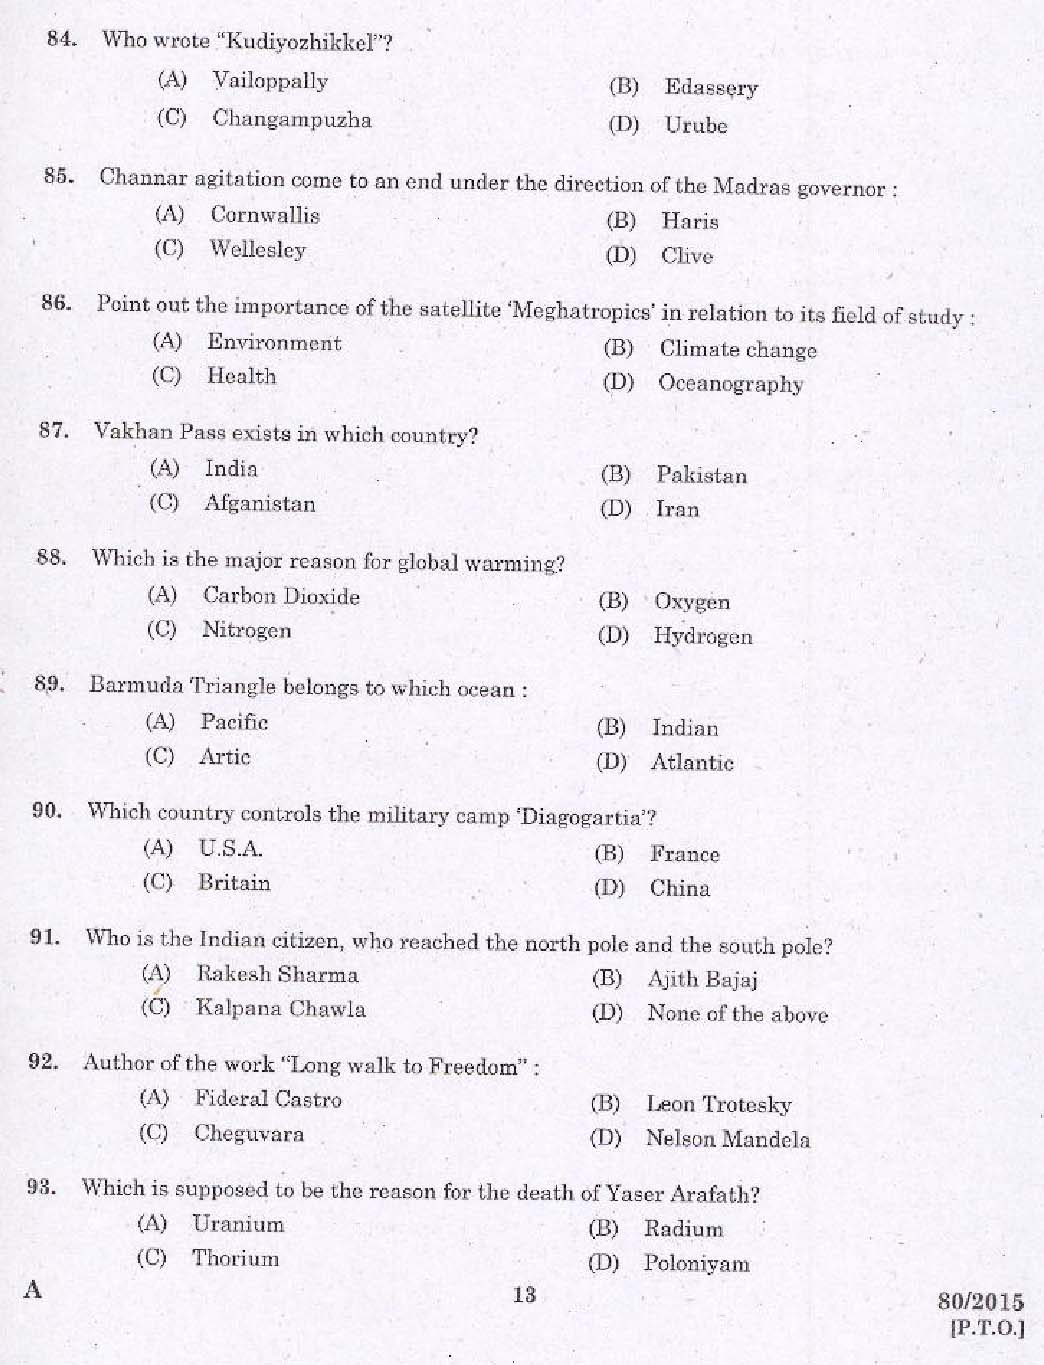 Kerala PSC Station Officer Exam Question Code 802015 11